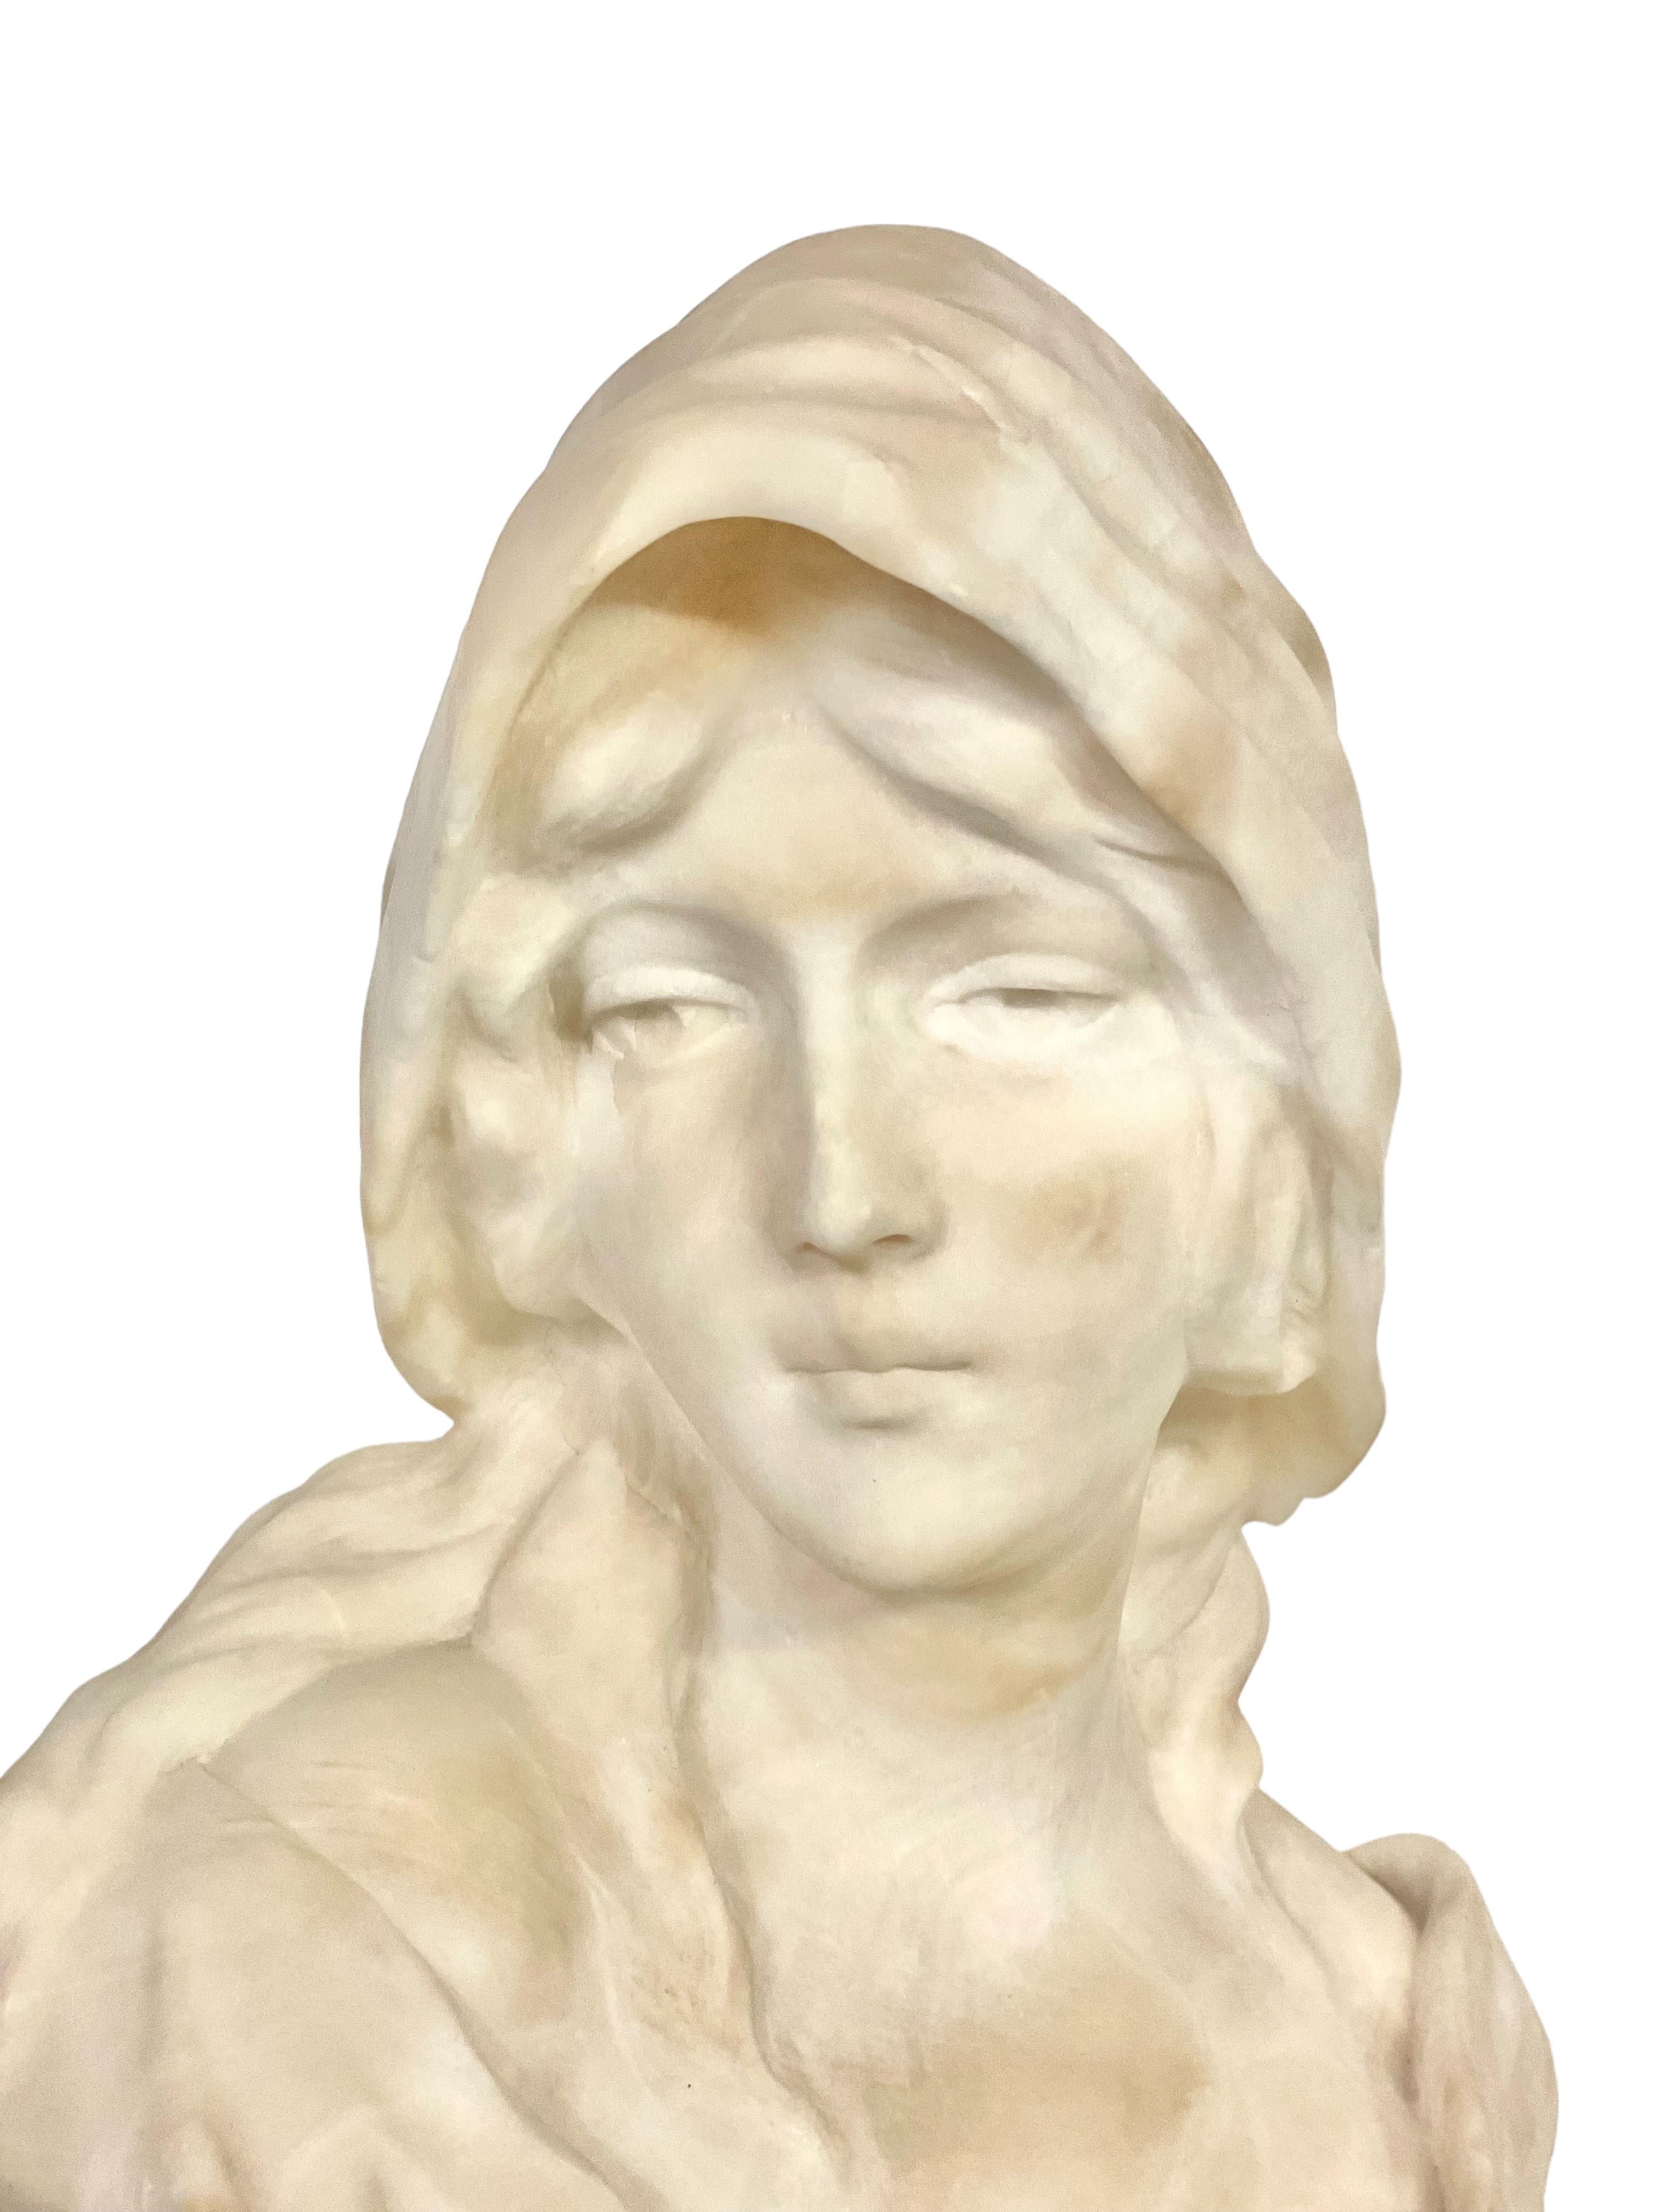 Introducing a mesmerizing alabaster bust by renowned sculptor Georges Morin (1874-1950). This exquisite piece showcases a young woman in a delicately buttoned bustier, revealing a graceful neckline and long, gently wavy hair tucked under an elegant